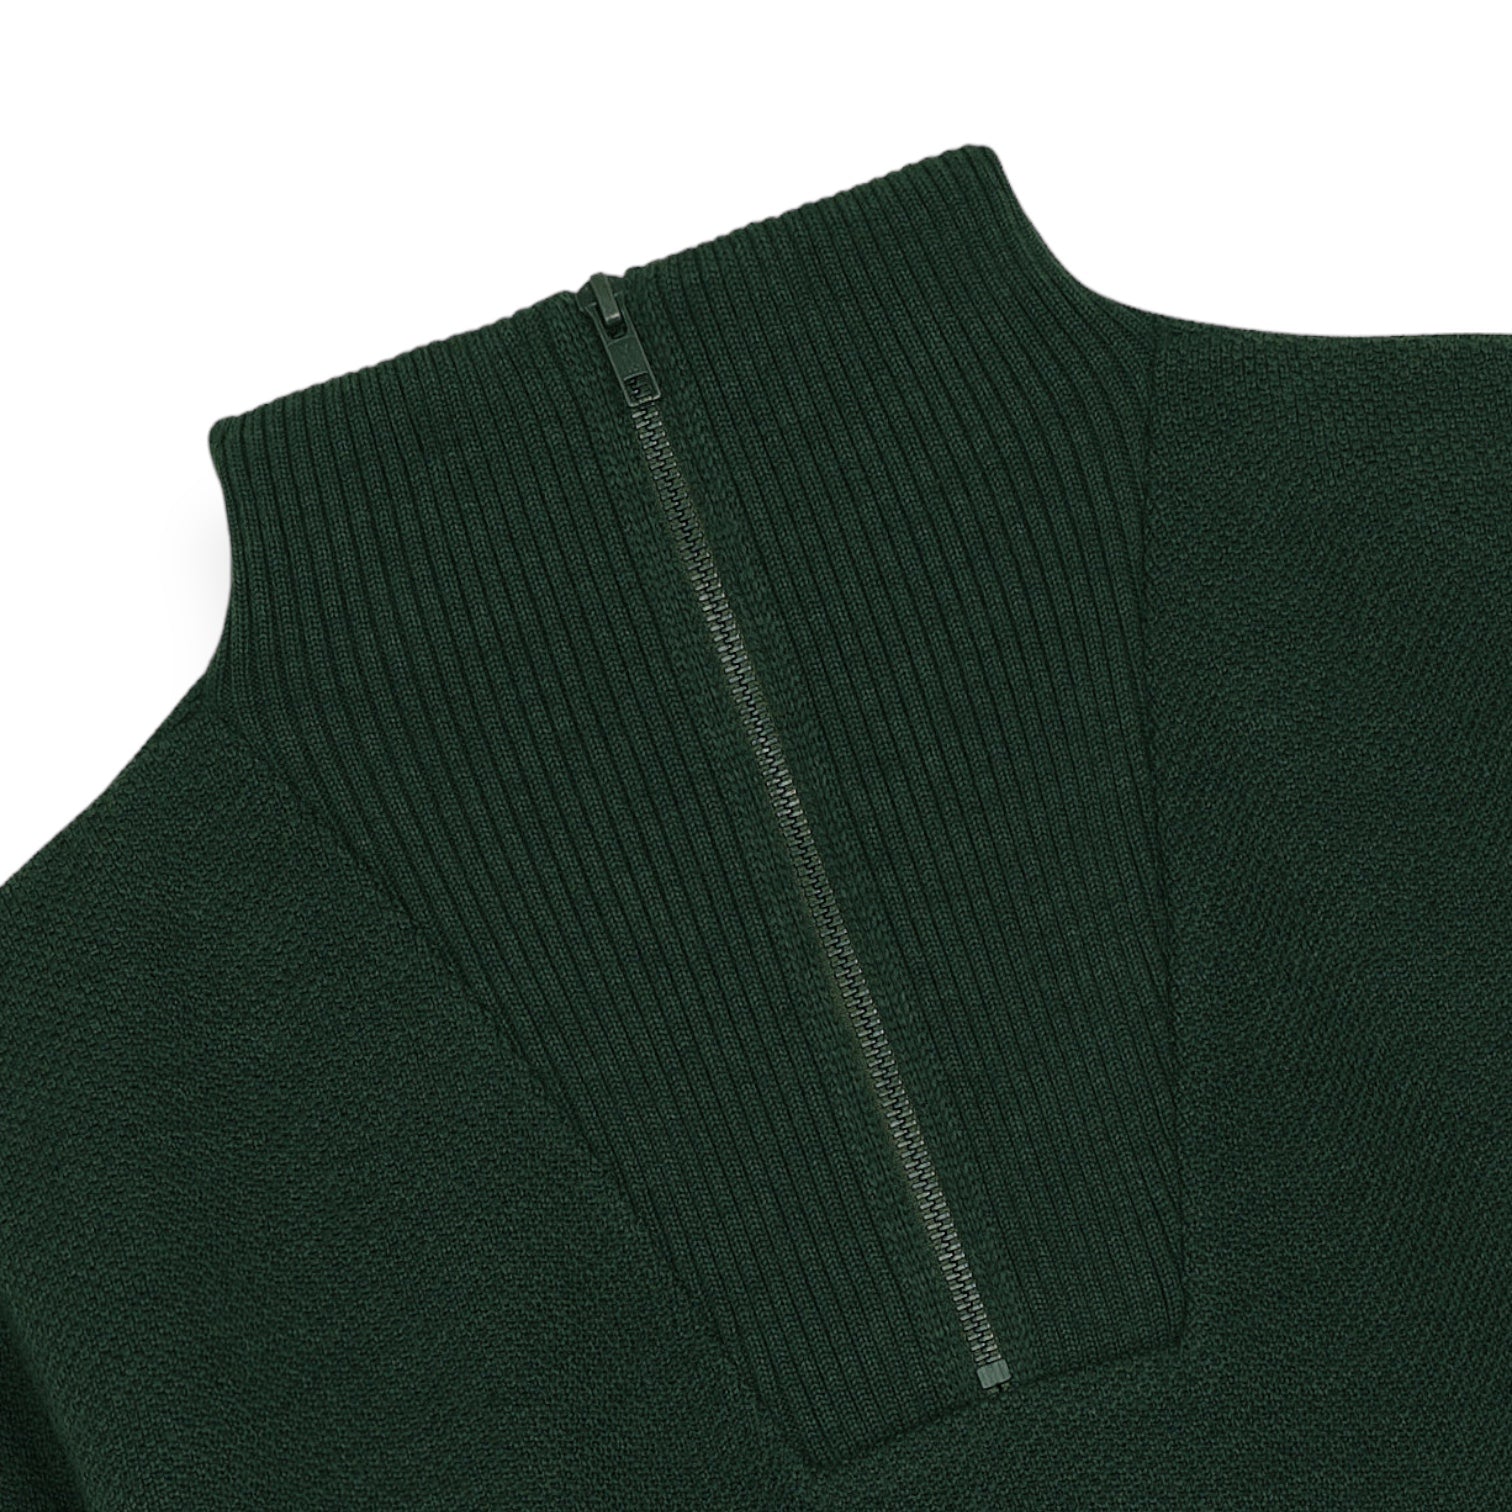 Nitto Knitwear - Pull Camionneur (Vert Forêt)